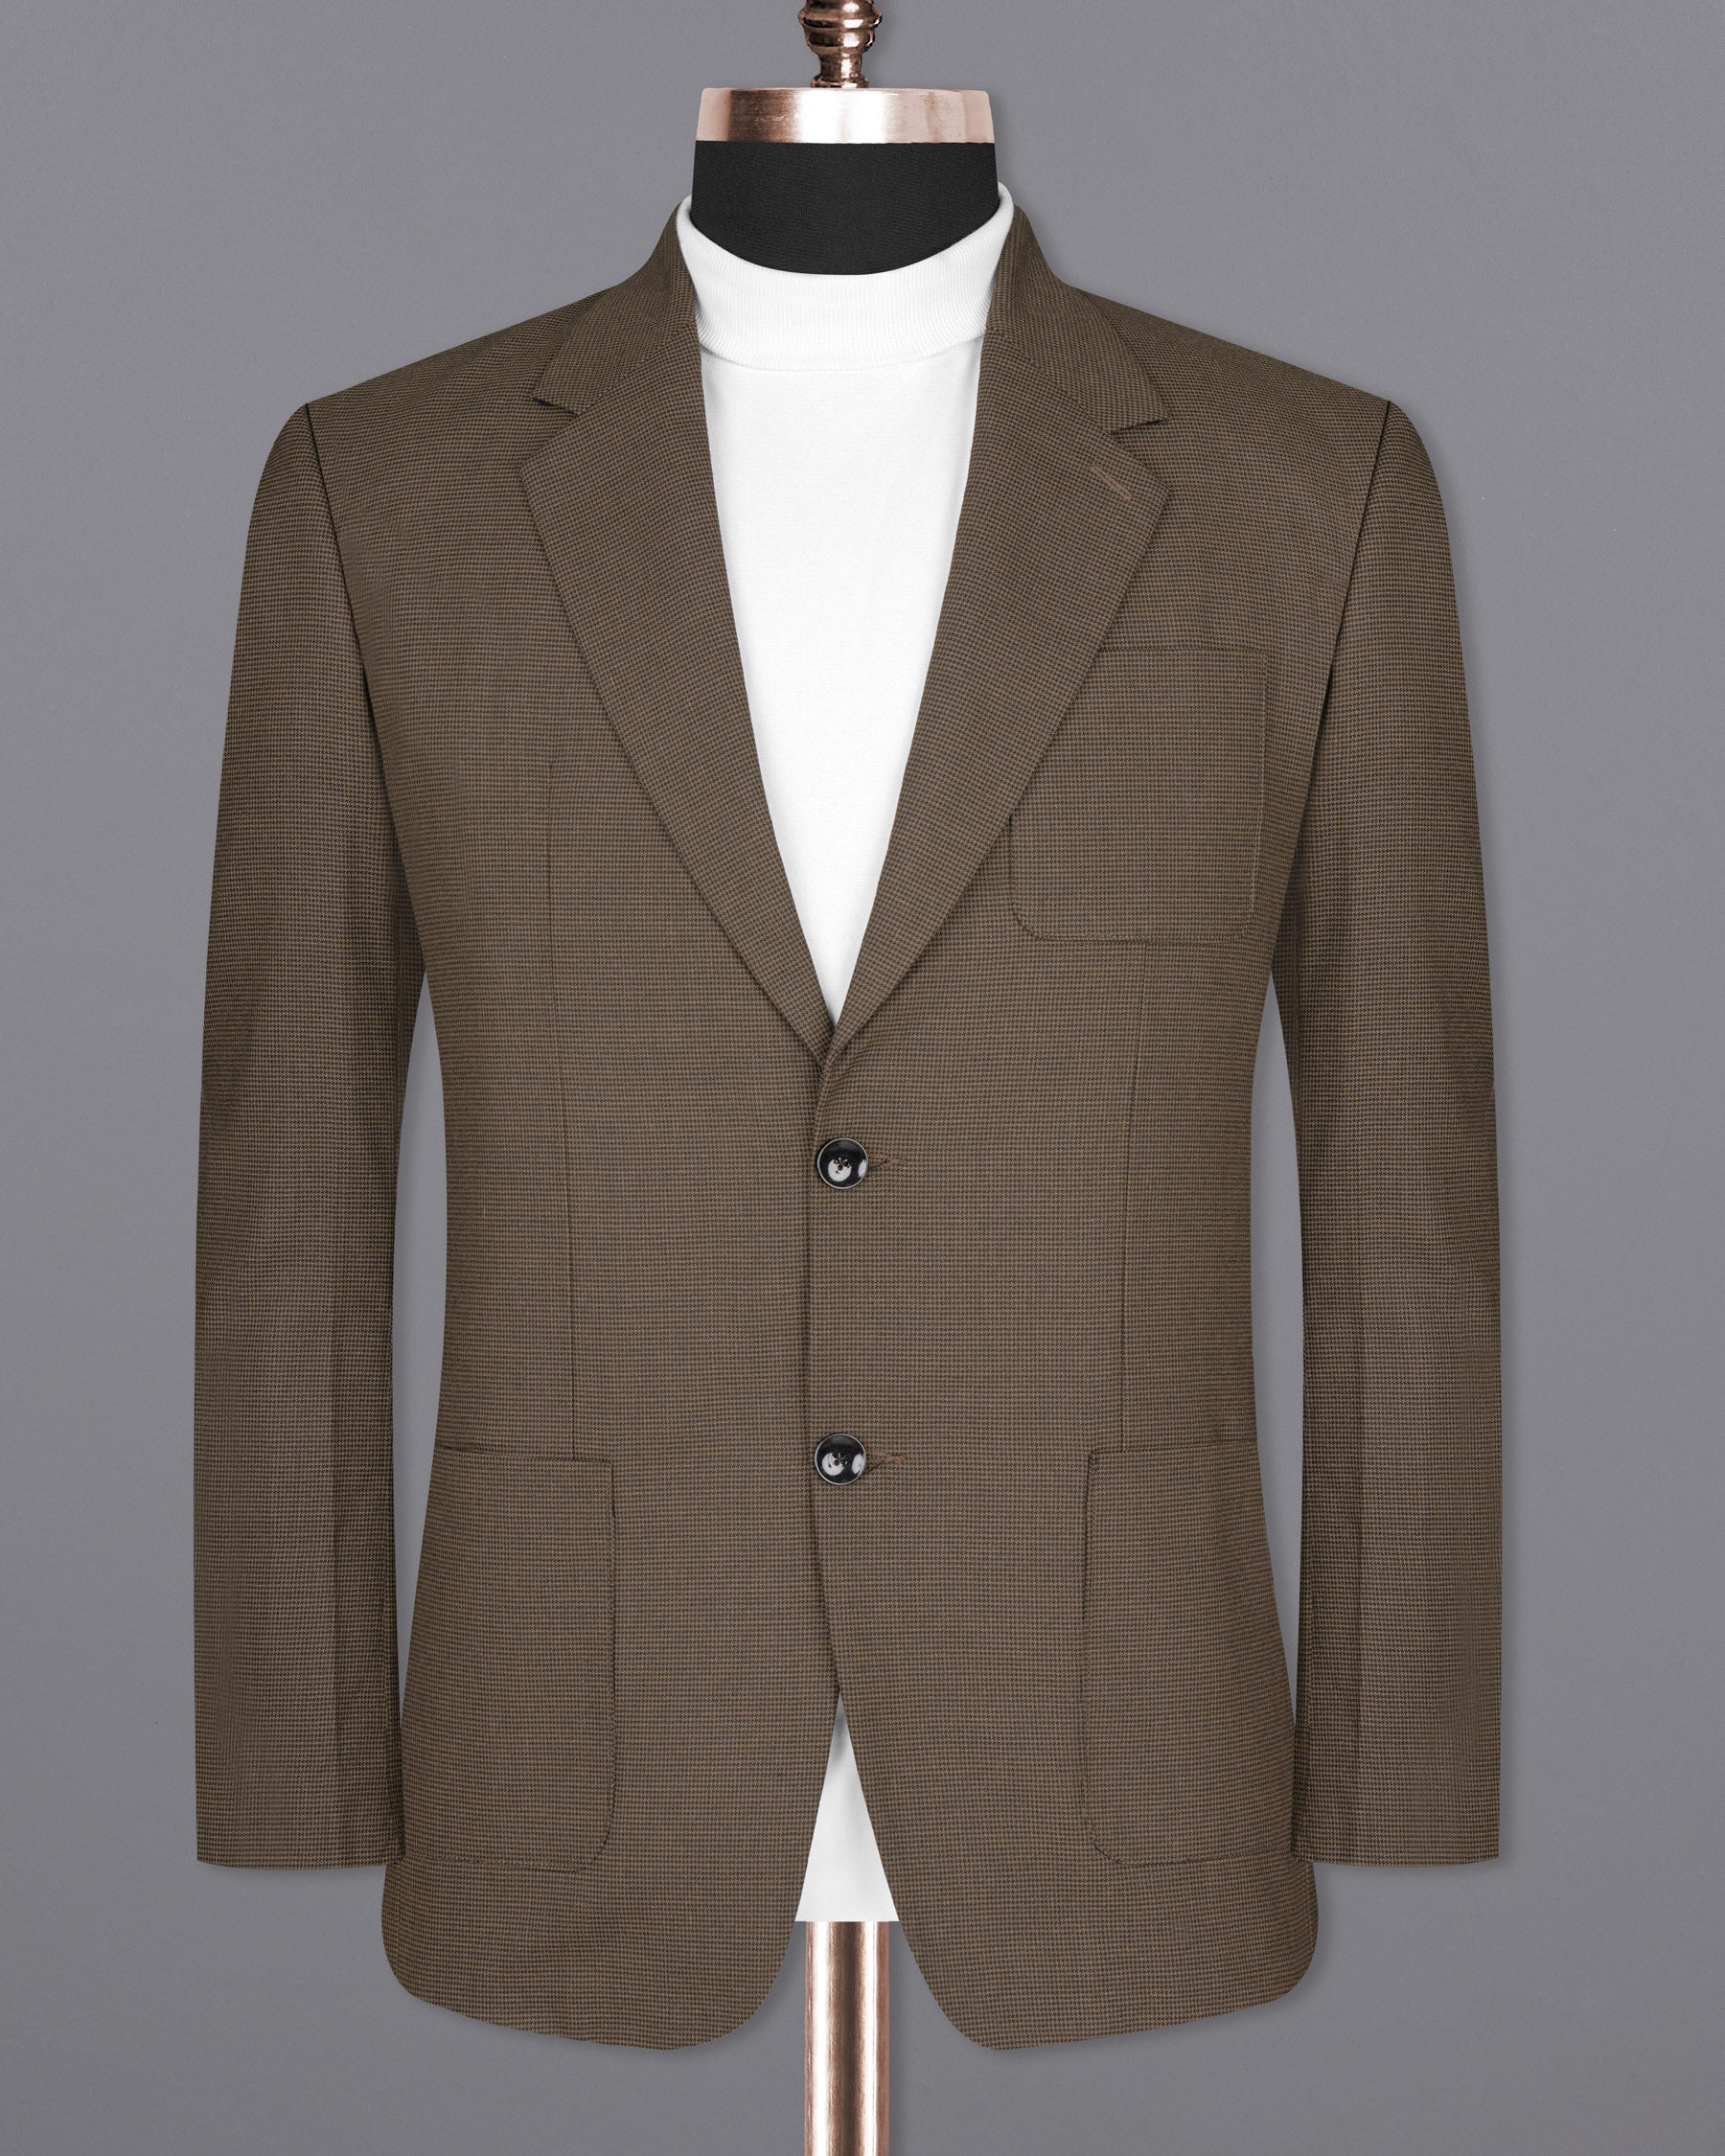 Coffee Brown Hounstooth Wool Rich Sports Blazer BL1600-SB-PP-36, BL1600-SB-PP-38, BL1600-SB-PP-40, BL1600-SB-PP-42, BL1600-SB-PP-44, BL1600-SB-PP-46, BL1600-SB-PP-48, BL1600-SB-PP-50, BL1600-SB-PP-52, BL1600-SB-PP-54, BL1600-SB-PP-56, BL1600-SB-PP-58, BL1600-SB-PP-60